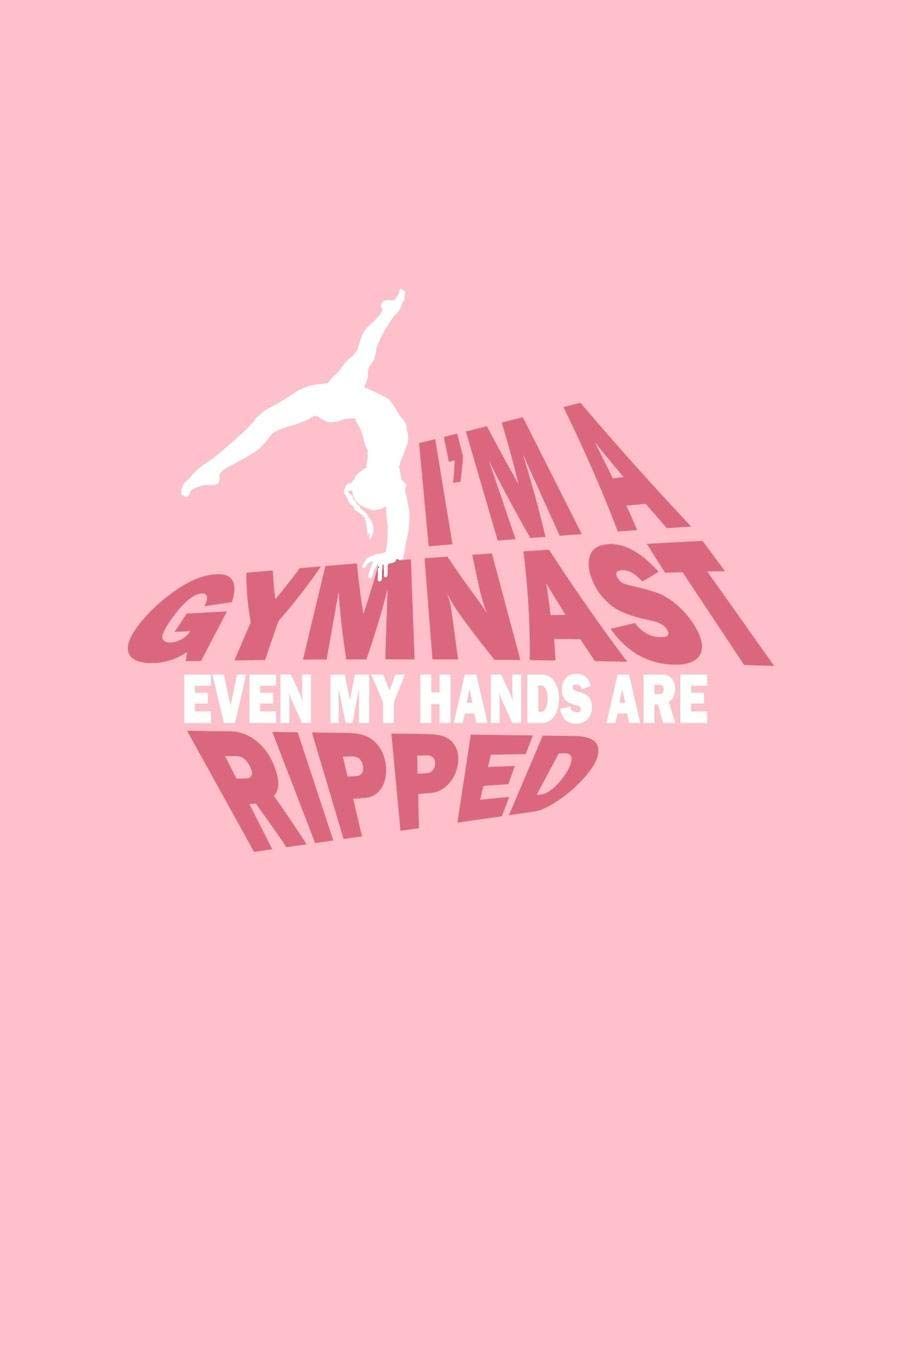 Amazon.in: Buy I'm A Gymnast Even My Hands Are Ripped: Lined Journal'm A Gymnast Even My Hands Are Ripped Gymnastics Girl Gift Ruled Diary, Prayer, Gratitude, Writing, Travel